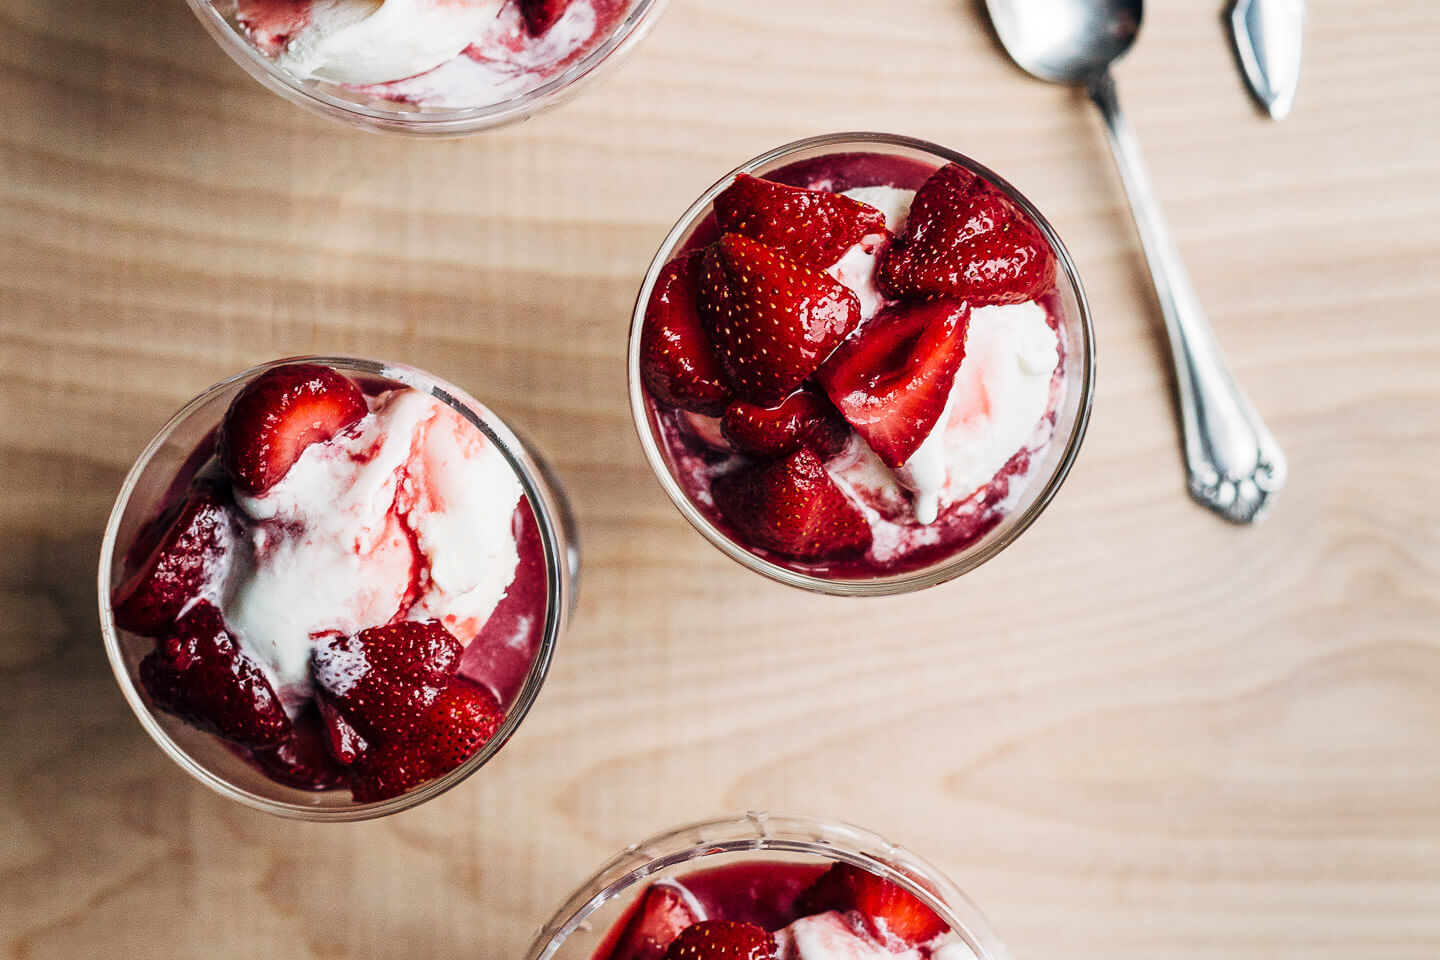 Ripe strawberries in red wine is the kind of effortless summer dessert that we all need more of. With hints of lemon and fresh thyme, the red wine reduction melds beautifully with ripe strawberries and is perfect spooned over vanilla ice cream. 